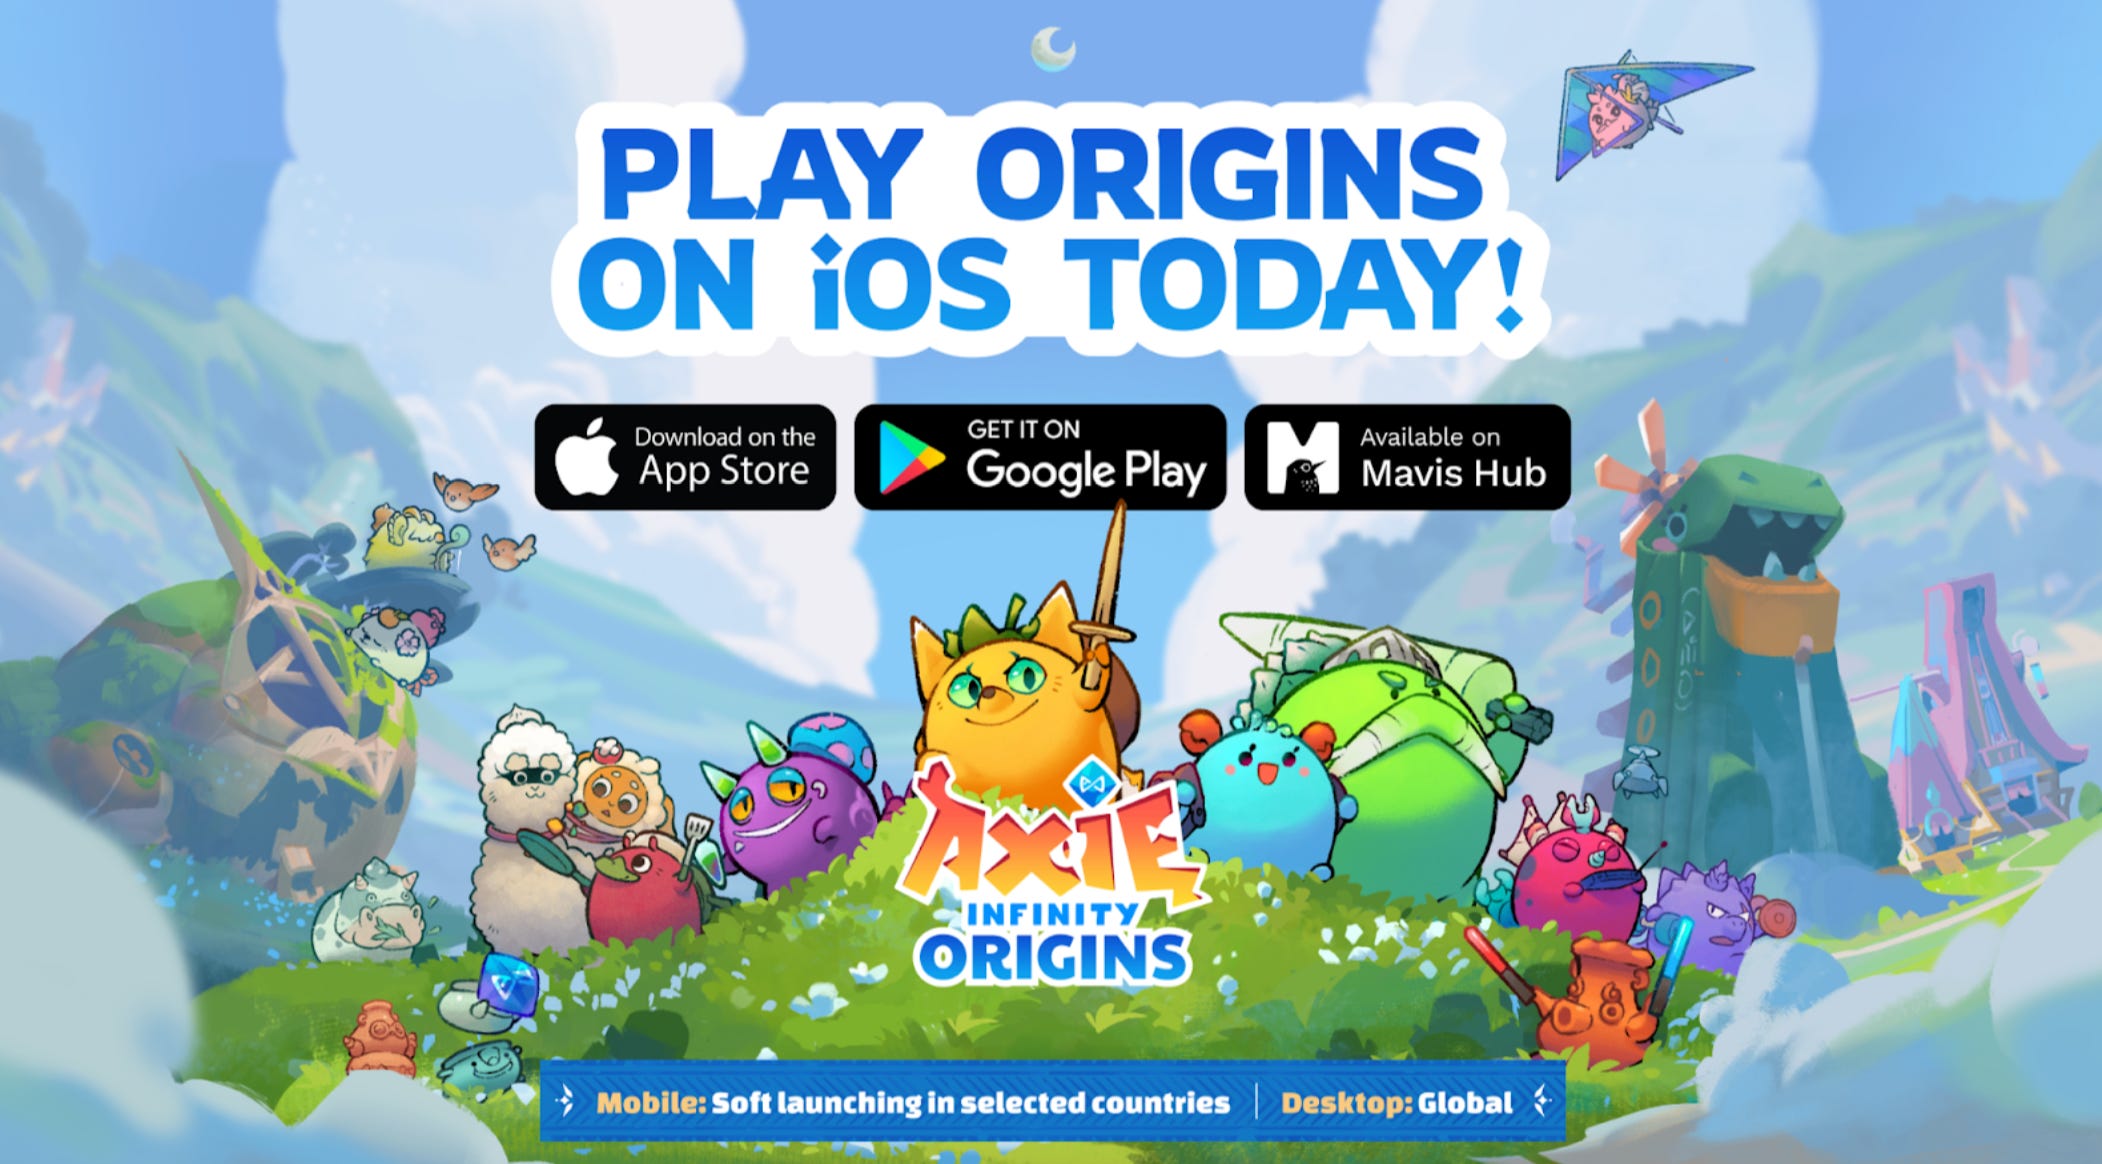 Now Playing on the App Store